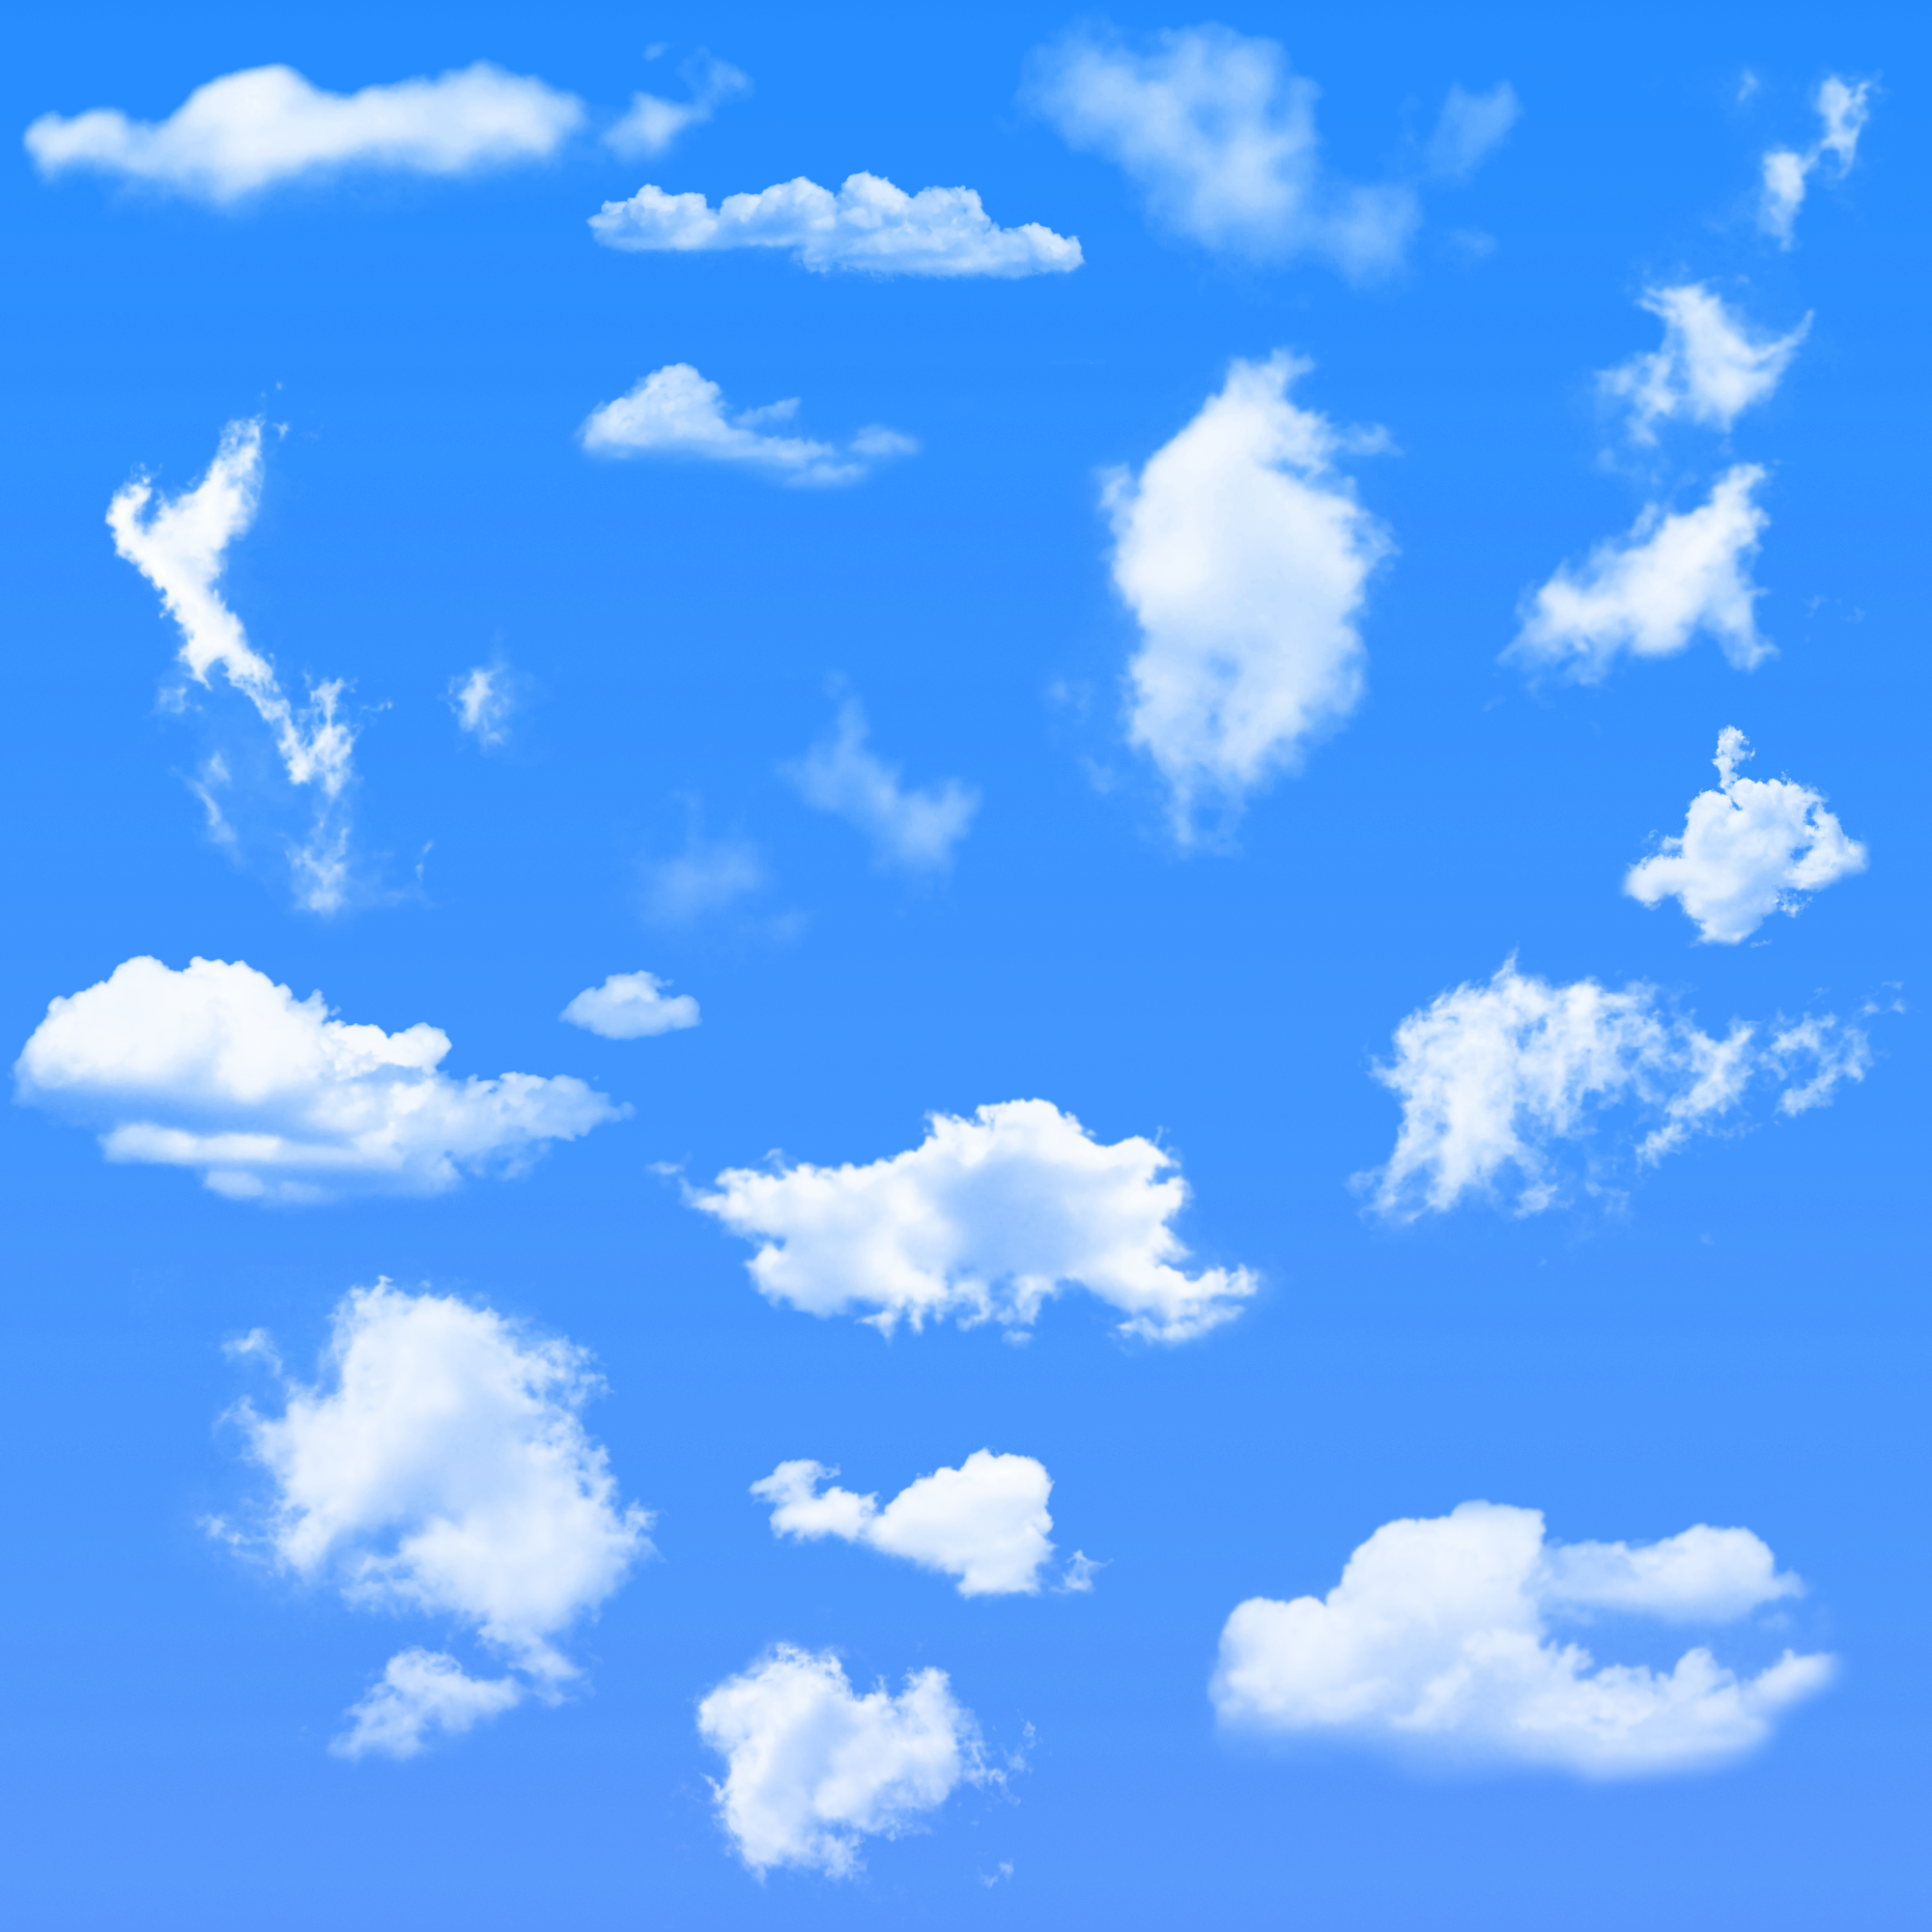 cloud brushes photoshop free download